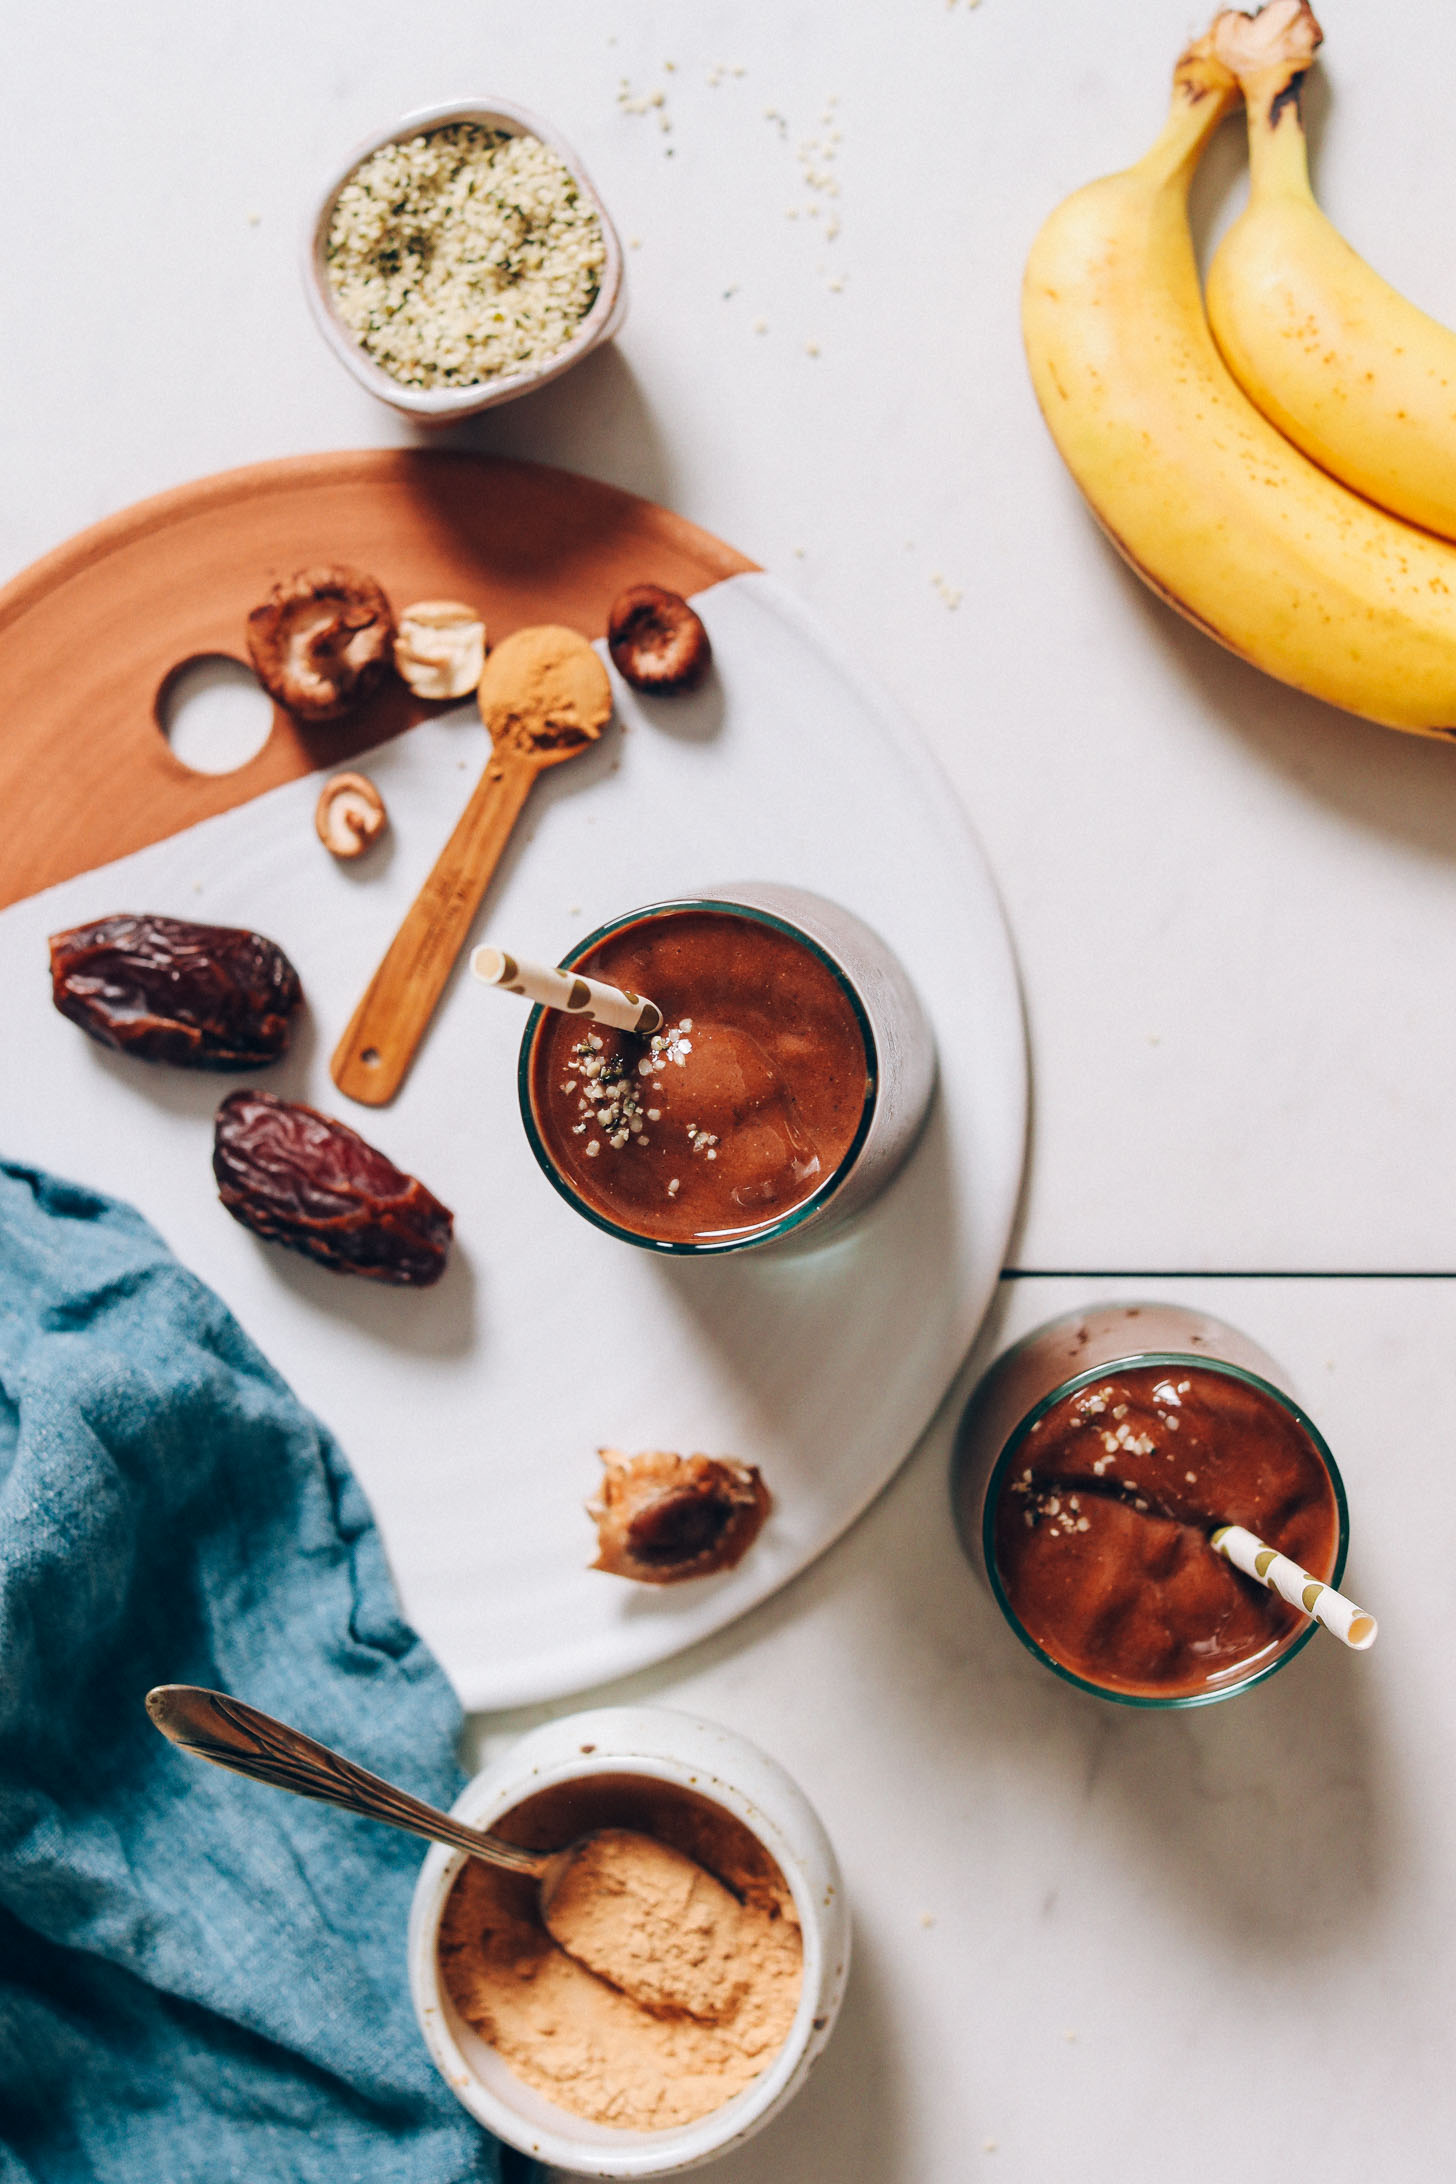 Top down shot of two glasses of our Adaptogenic Chocolate Banana Shake next to ingredients used to make it